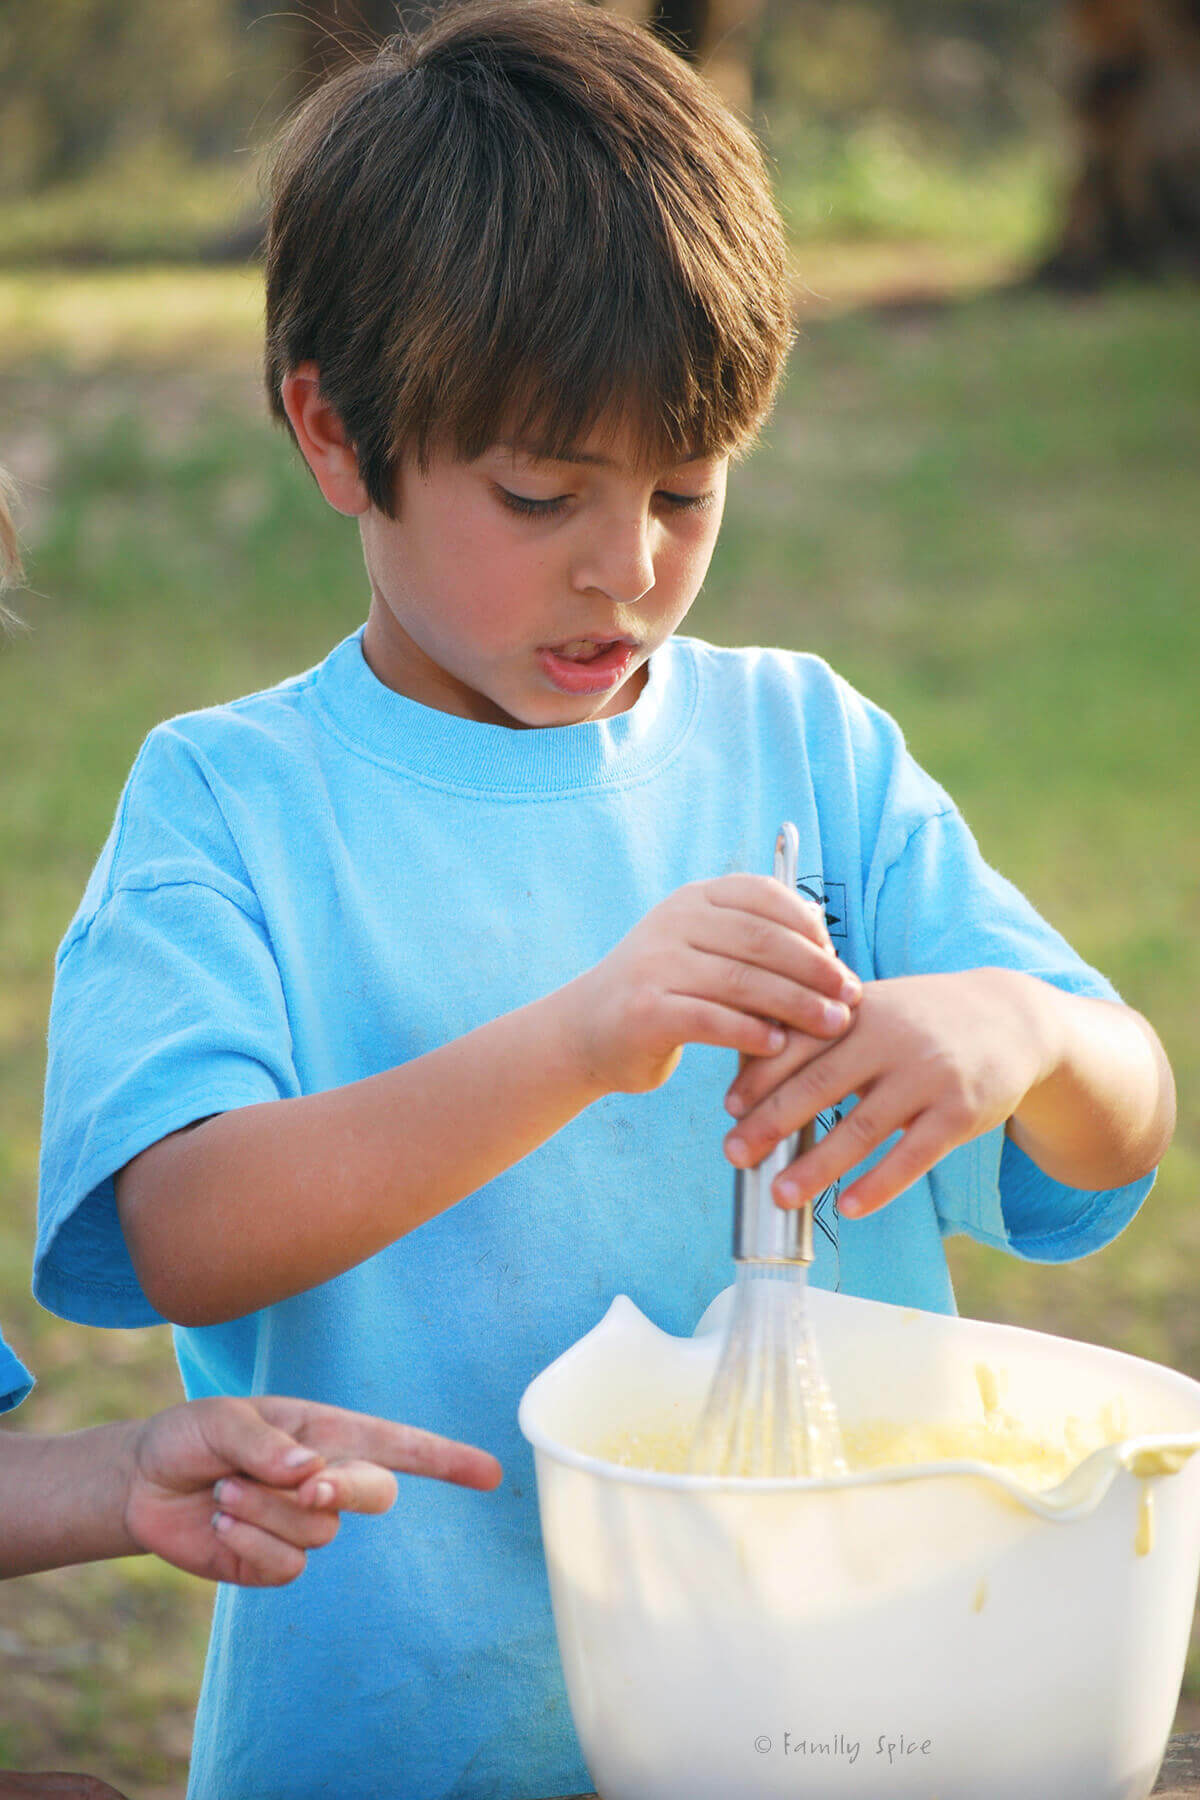 My son as a cub scout mixing up cake batter at a campsite